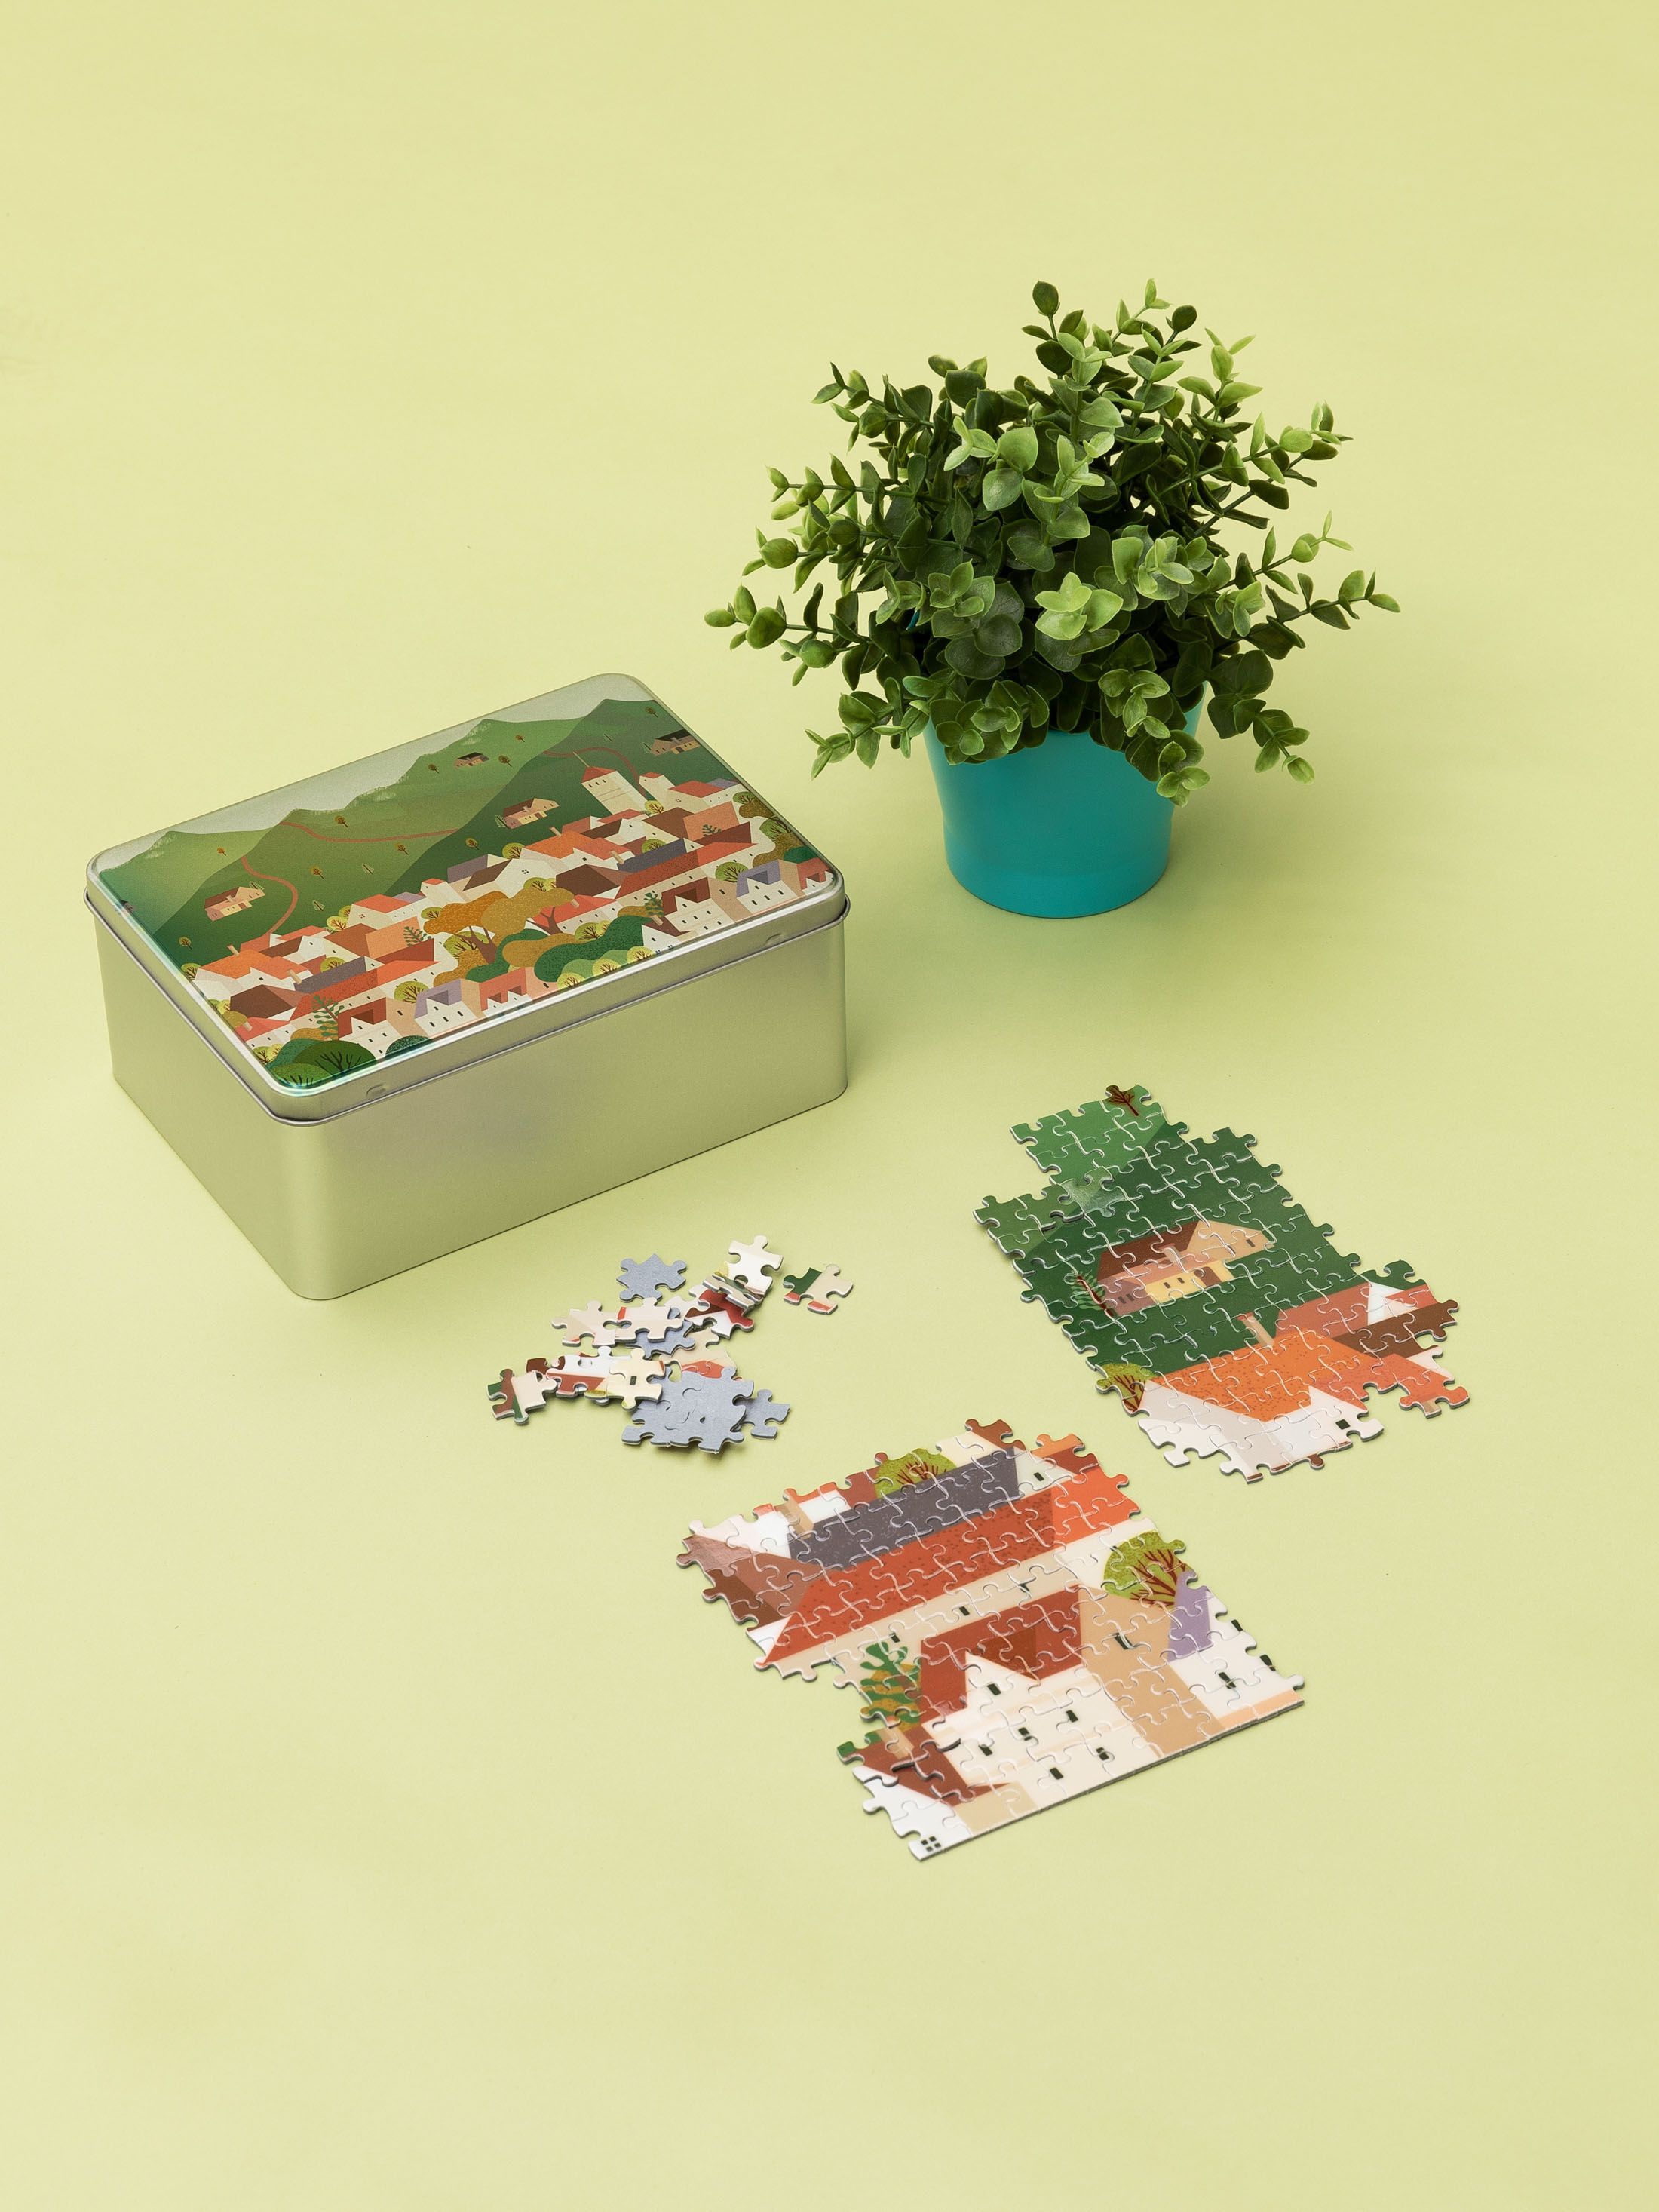 jigsaw puzzles made and manufactured